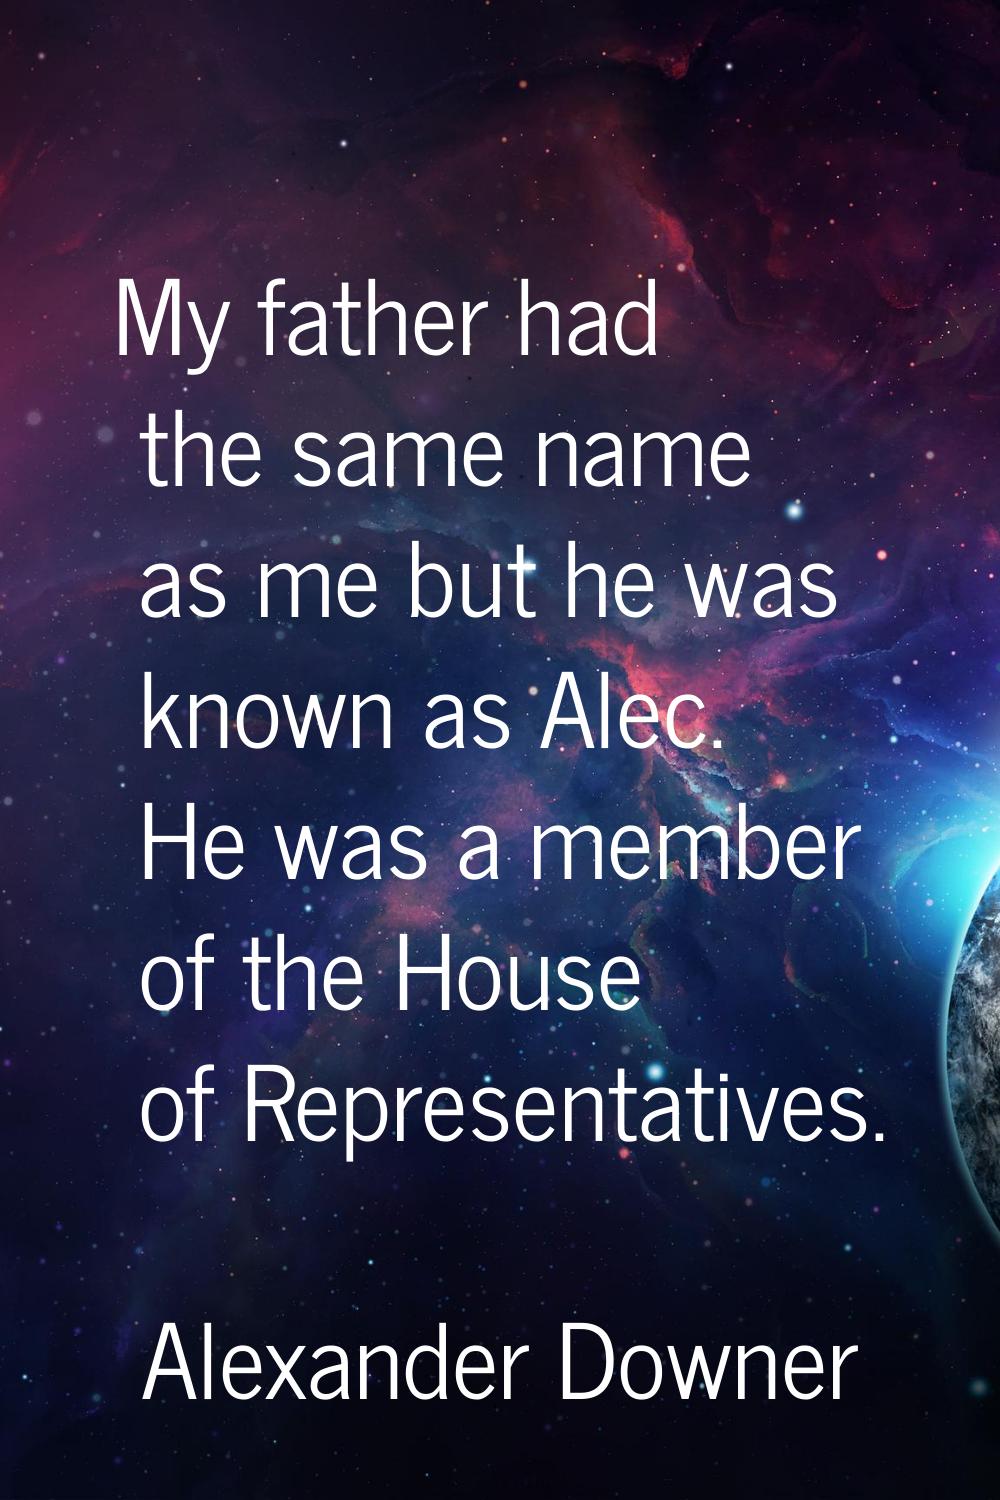 My father had the same name as me but he was known as Alec. He was a member of the House of Represe